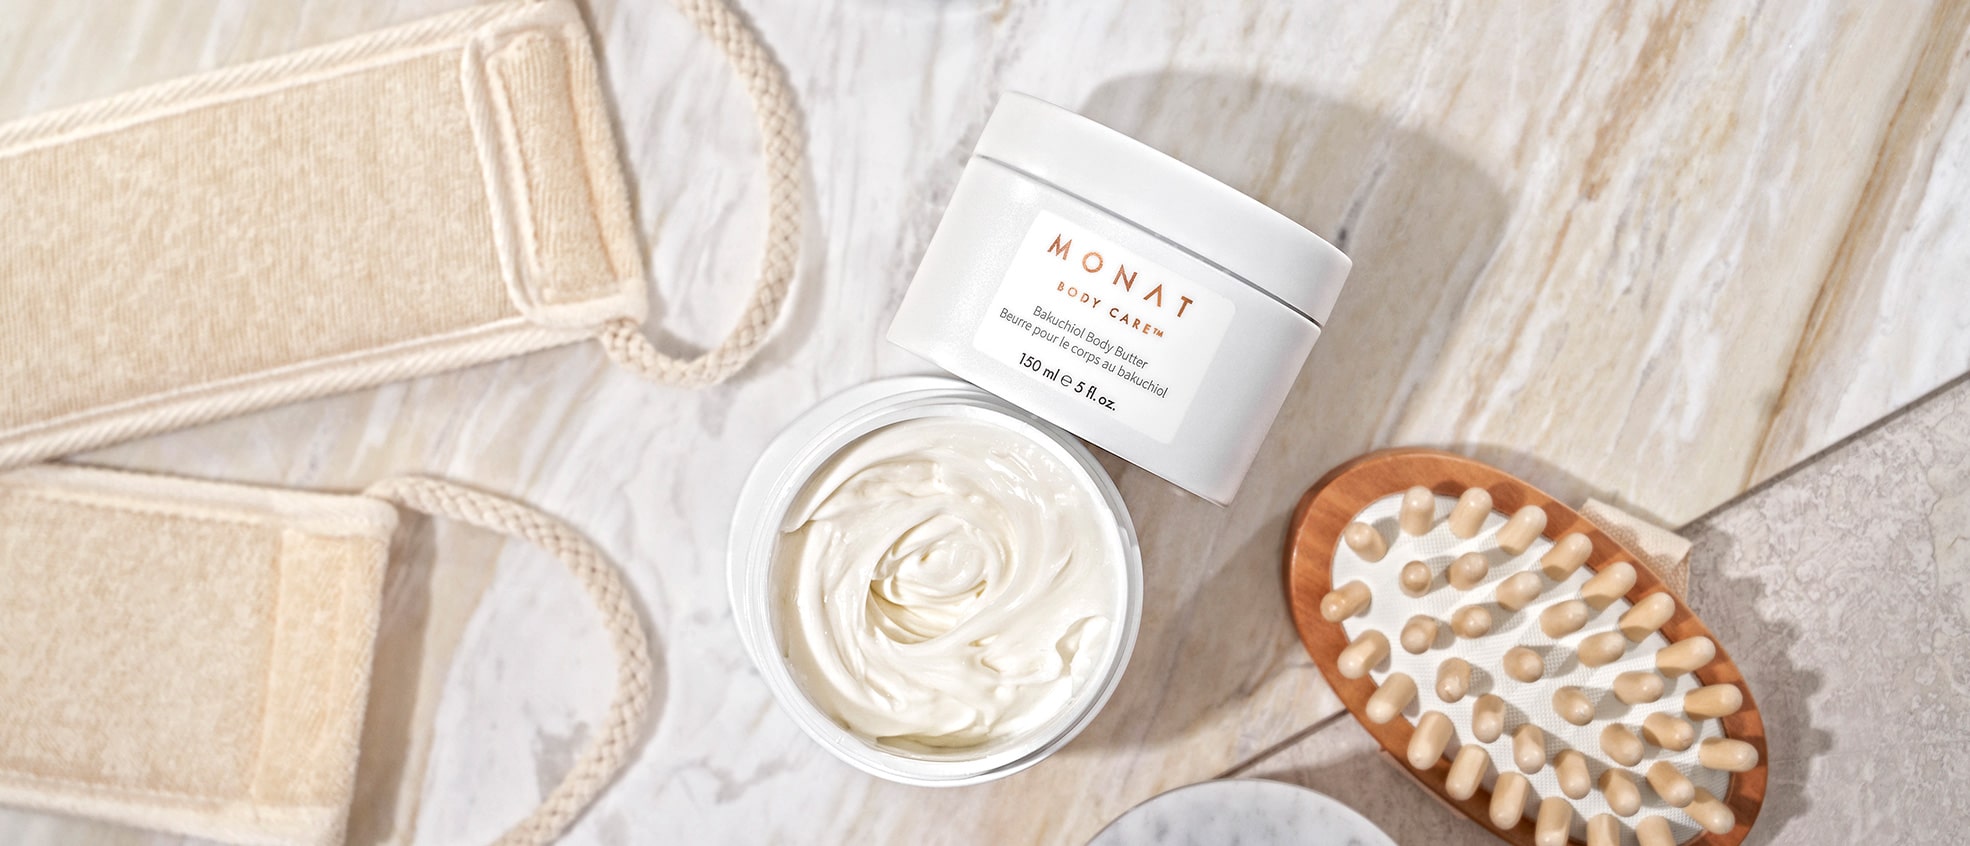 Two jars of a MONAT BODY CARE™ Bakuchiol Body Butter, one of this open showing its content, surrounded of a hair brush and a band of towel.